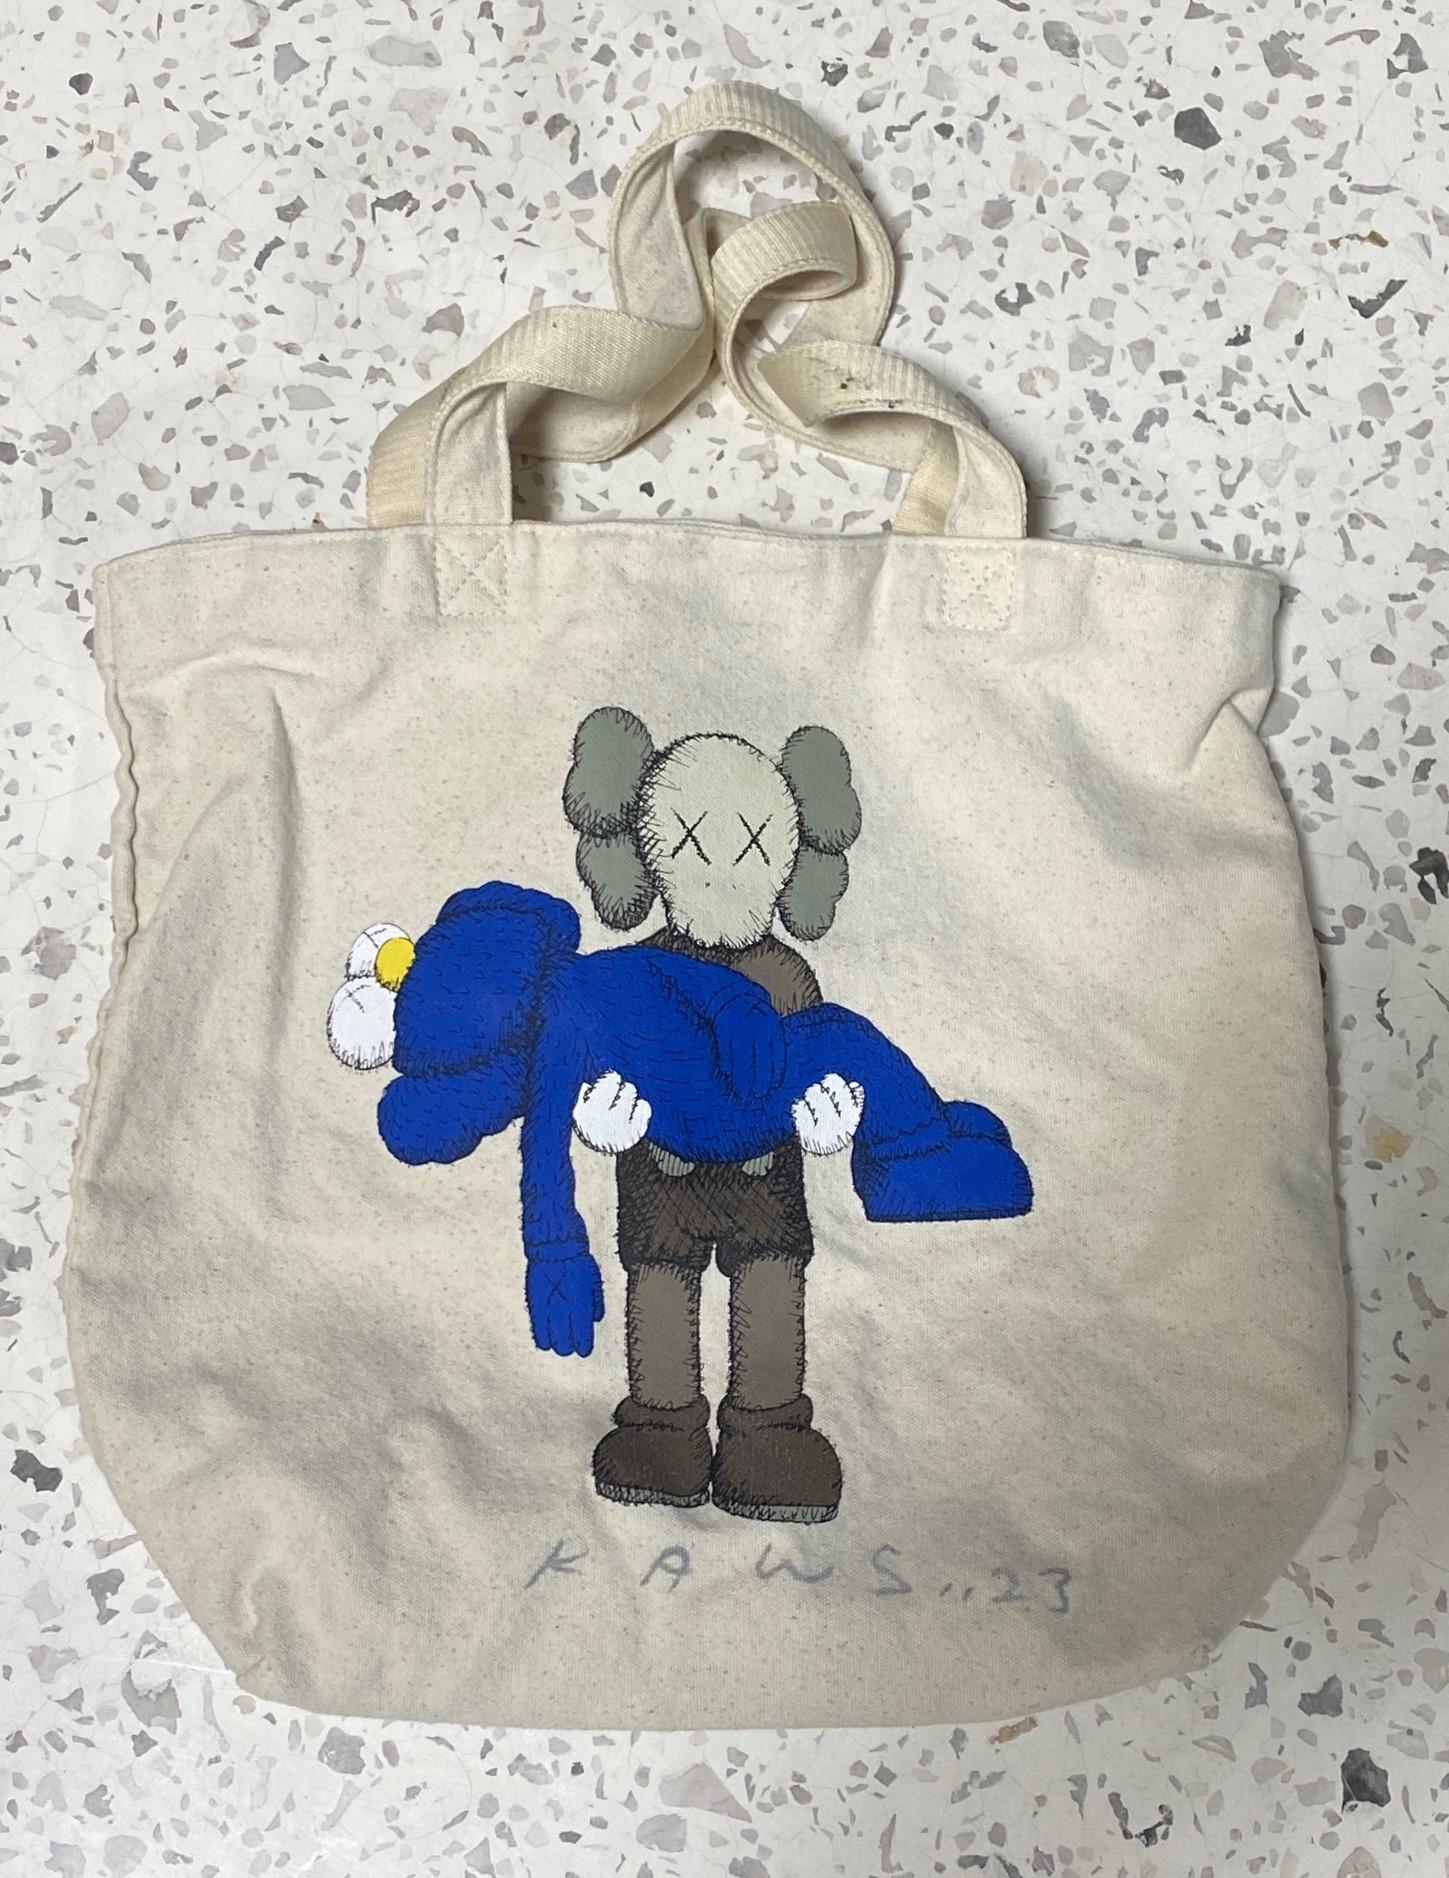 A quite rare signed tote shopping bag by world-renowned contemporary artist and New York-based sensation KAWS (Brian Donnelly). Art critics have universally and consistently compared KAWS to such historic masters as Jean-Michel Basquiat and Keith